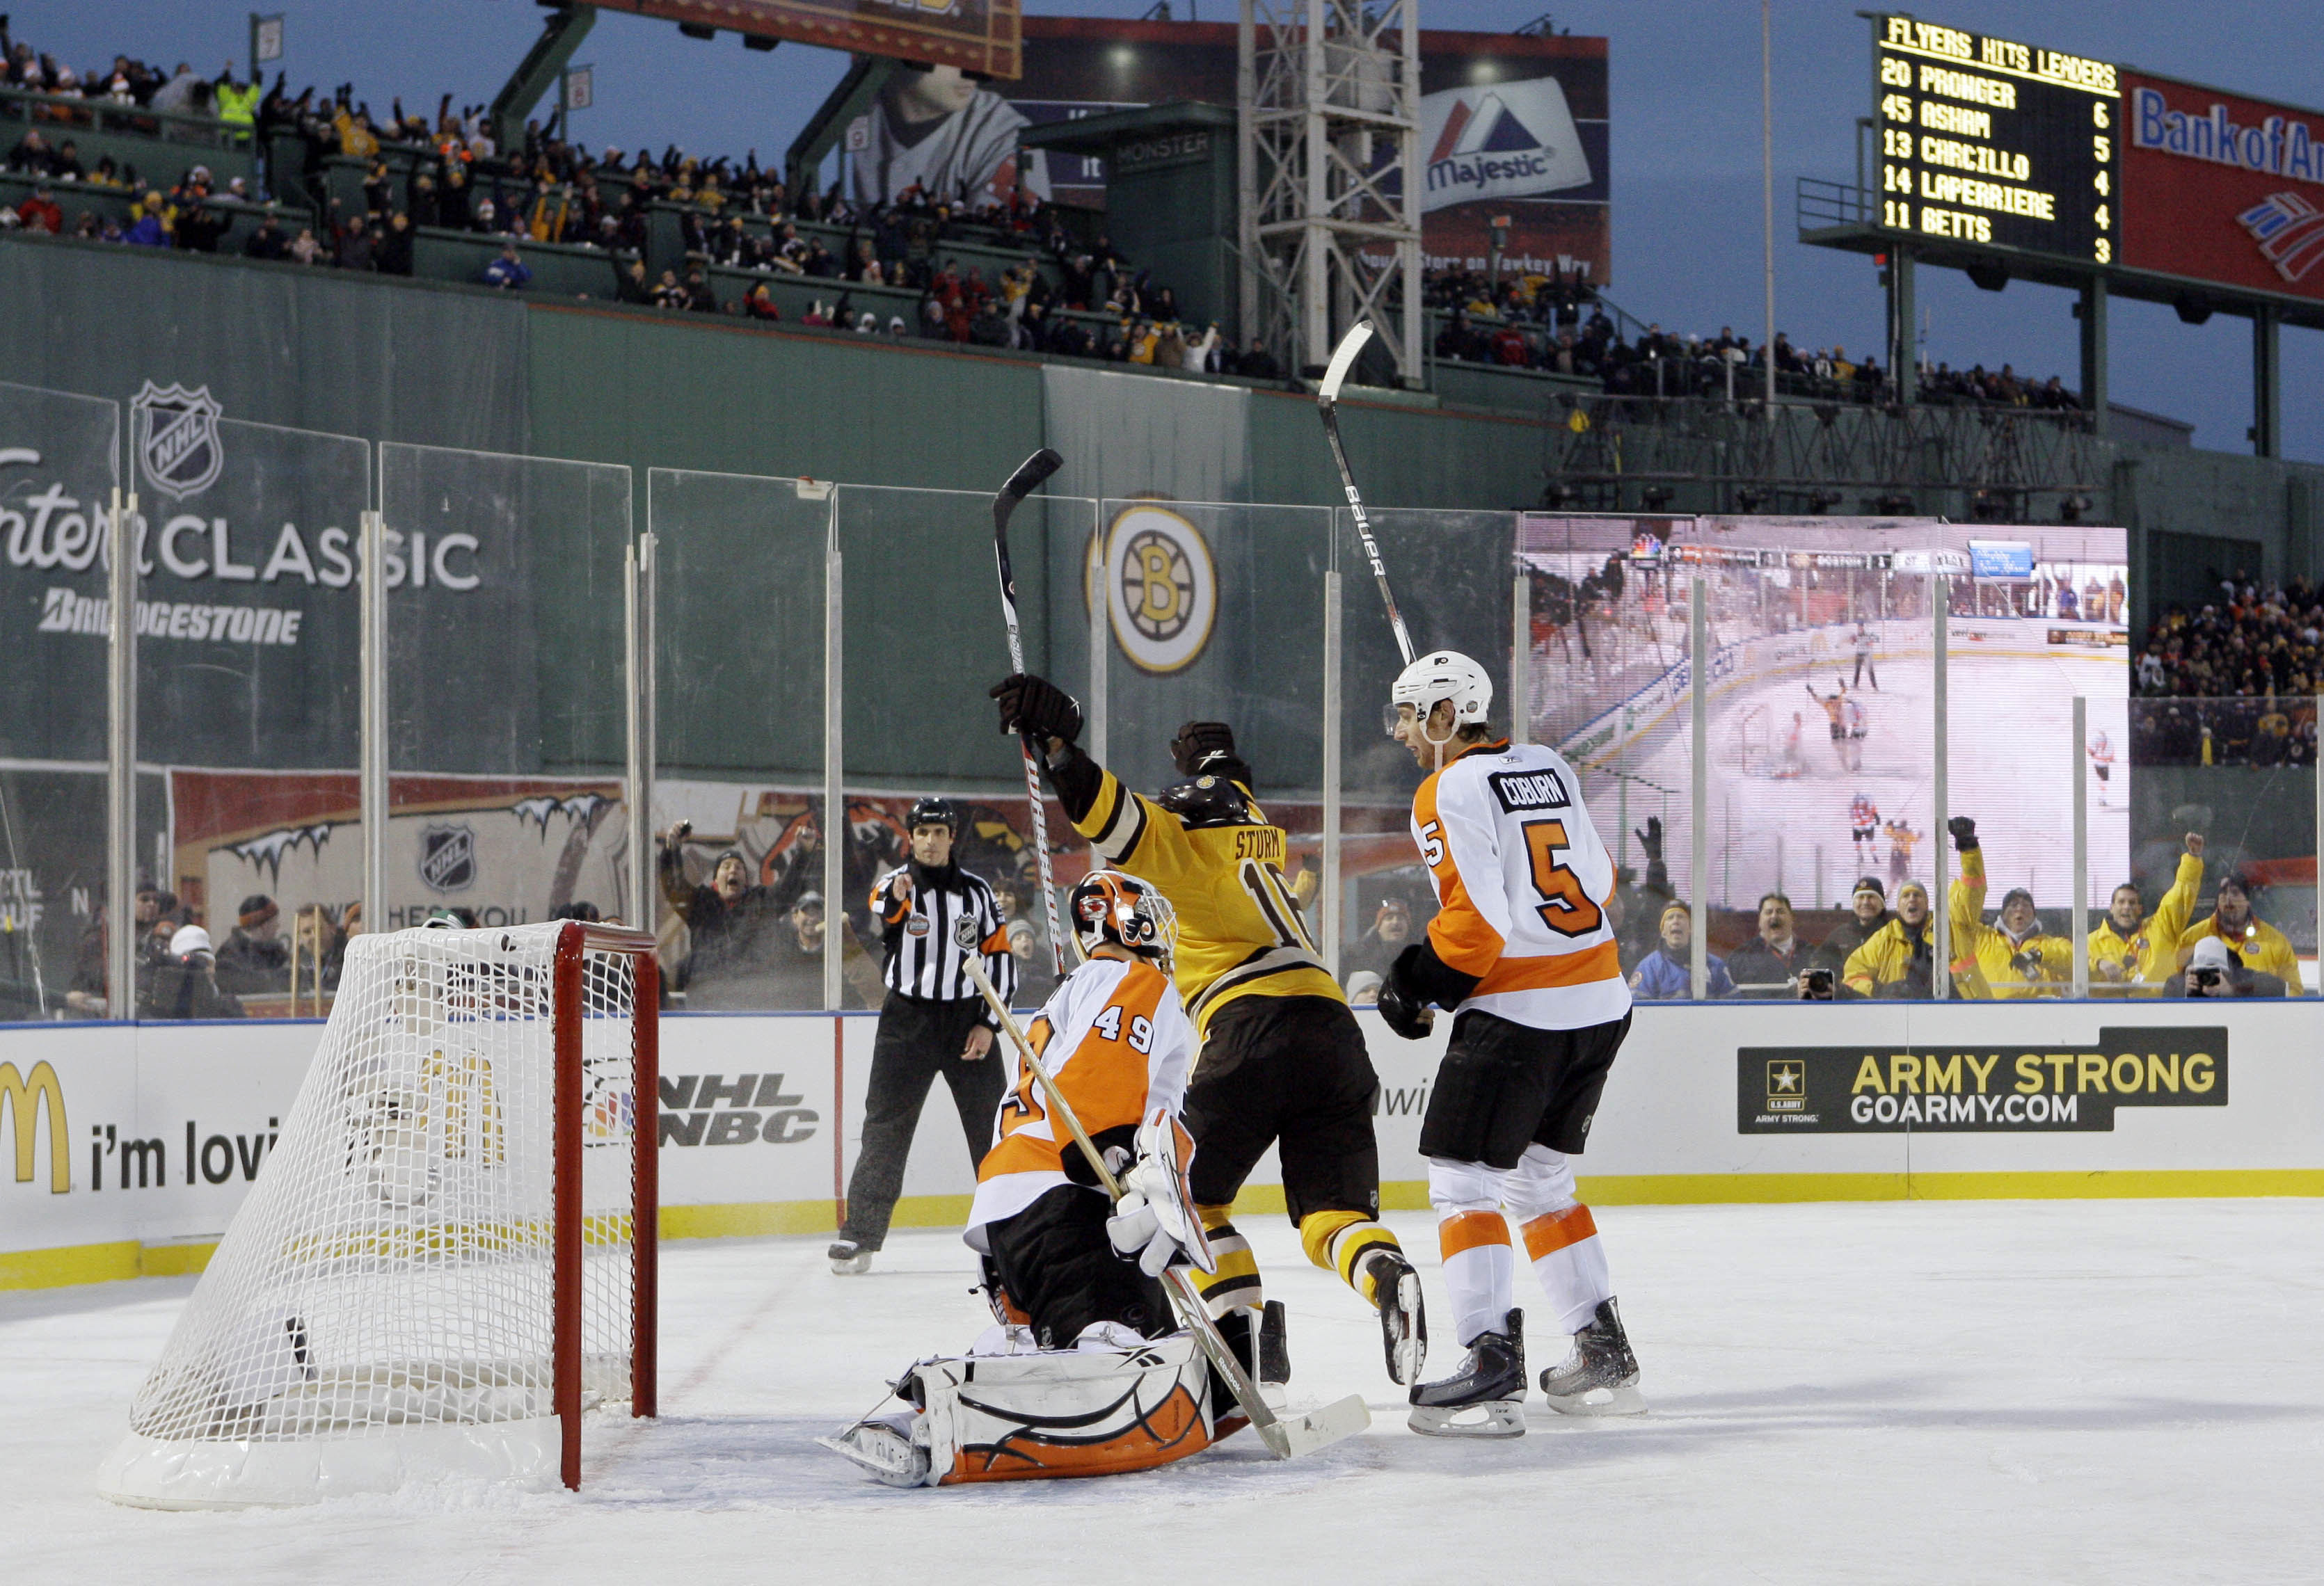 Fenway Park to host Boston Bruins in NHL's 2023 Winter Classic - ESPN